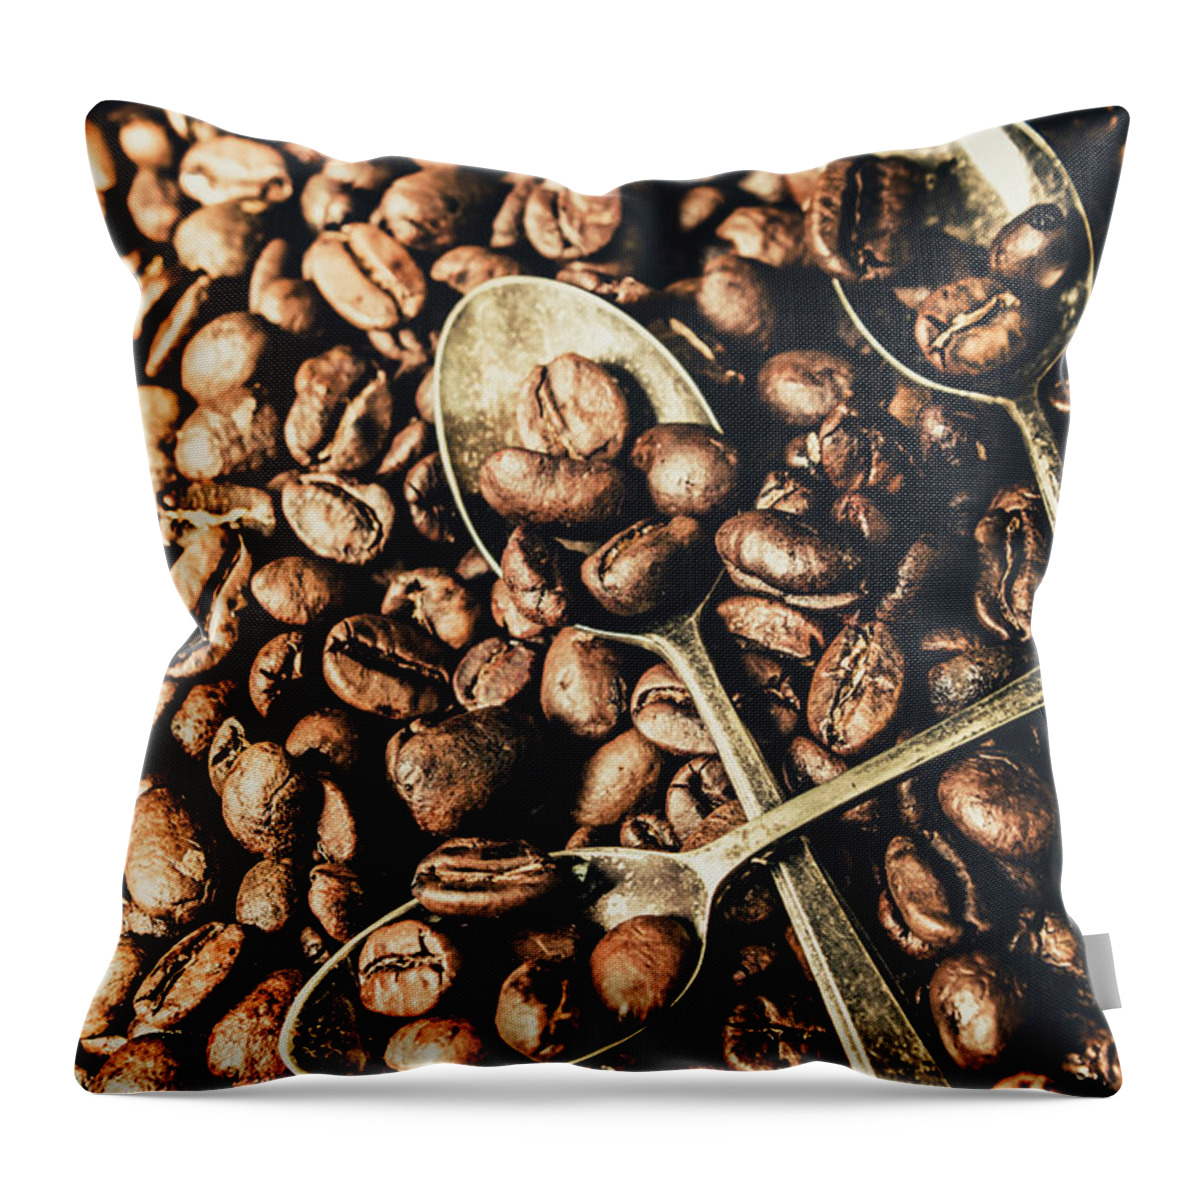 Vintage Throw Pillow featuring the photograph Cafeteria scoops by Jorgo Photography